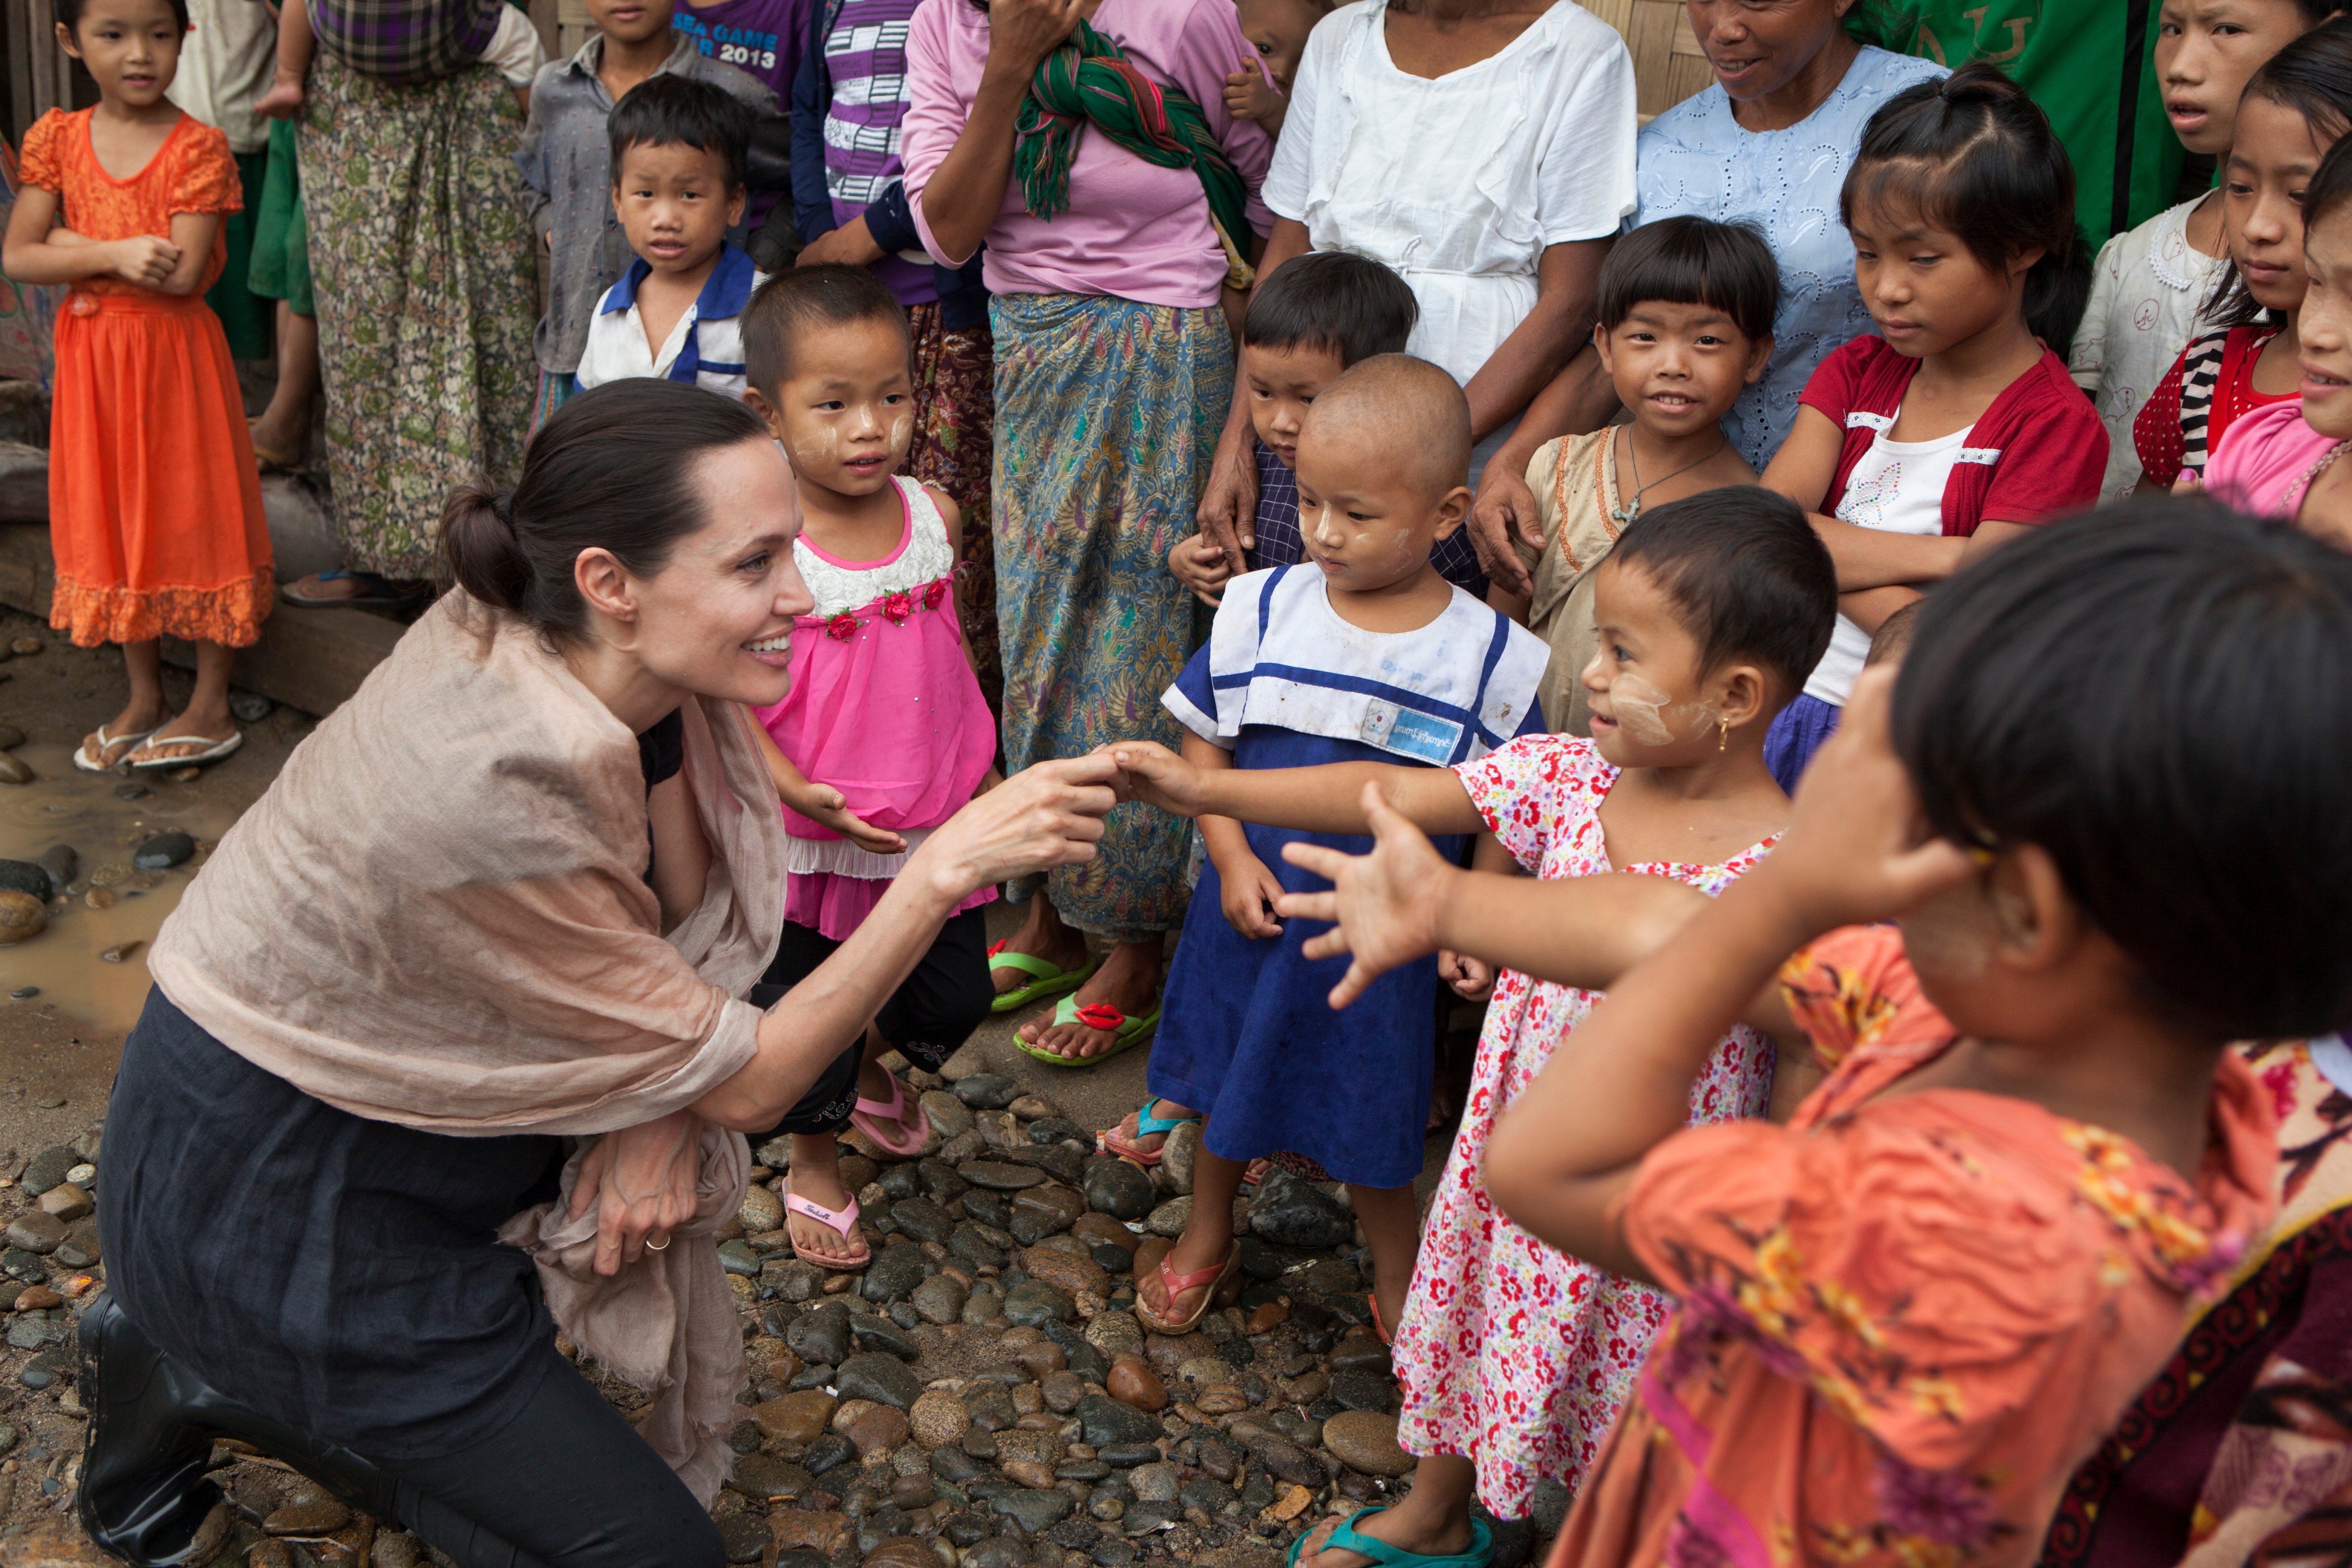 In this handout photo provided by the Maddox Jolie-Pitt Foundation, actress and activist Angelina Jolie Pitt meets children during a visit to Ja Mai Kaung Baptist refugee camp on July 30, 2015 in Myitkyina, Burma. (Tom Stoddart—Maddox Jolie-Pitt Foundation/Getty Images)